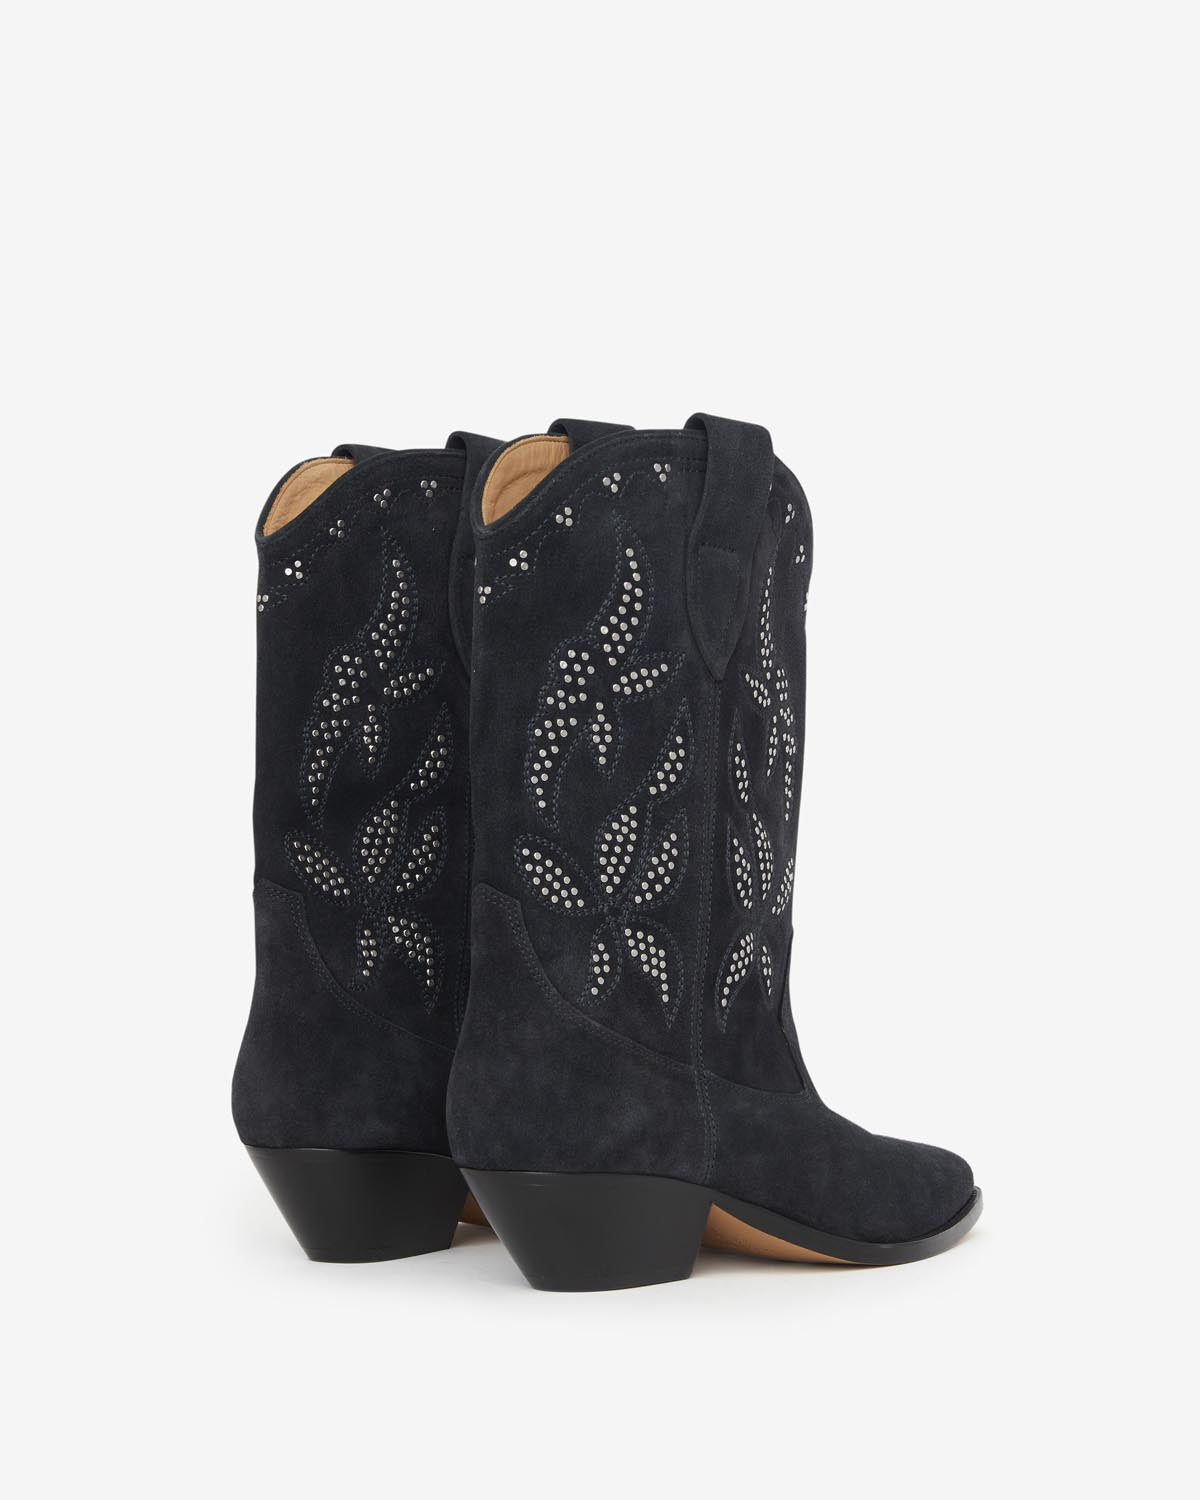 Boots duerto Woman Faded black-silver 2